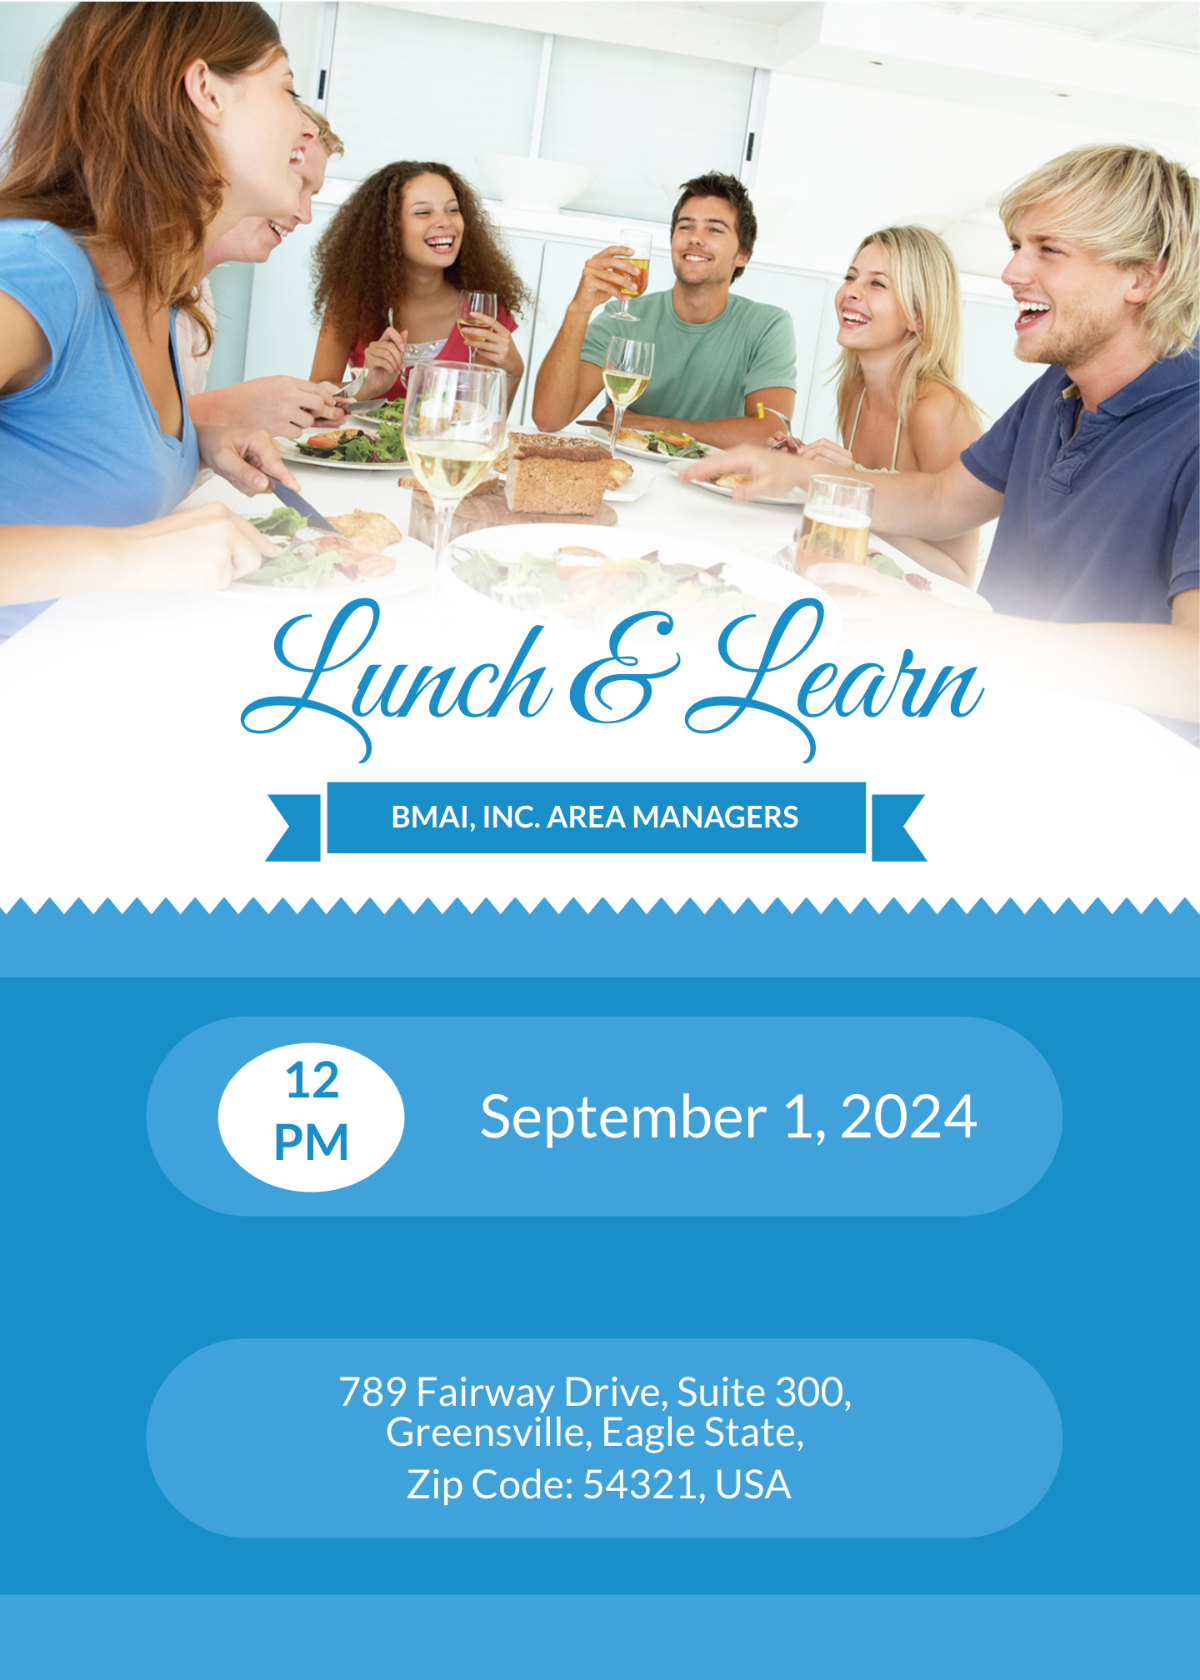 Learn & Lunch Invitation